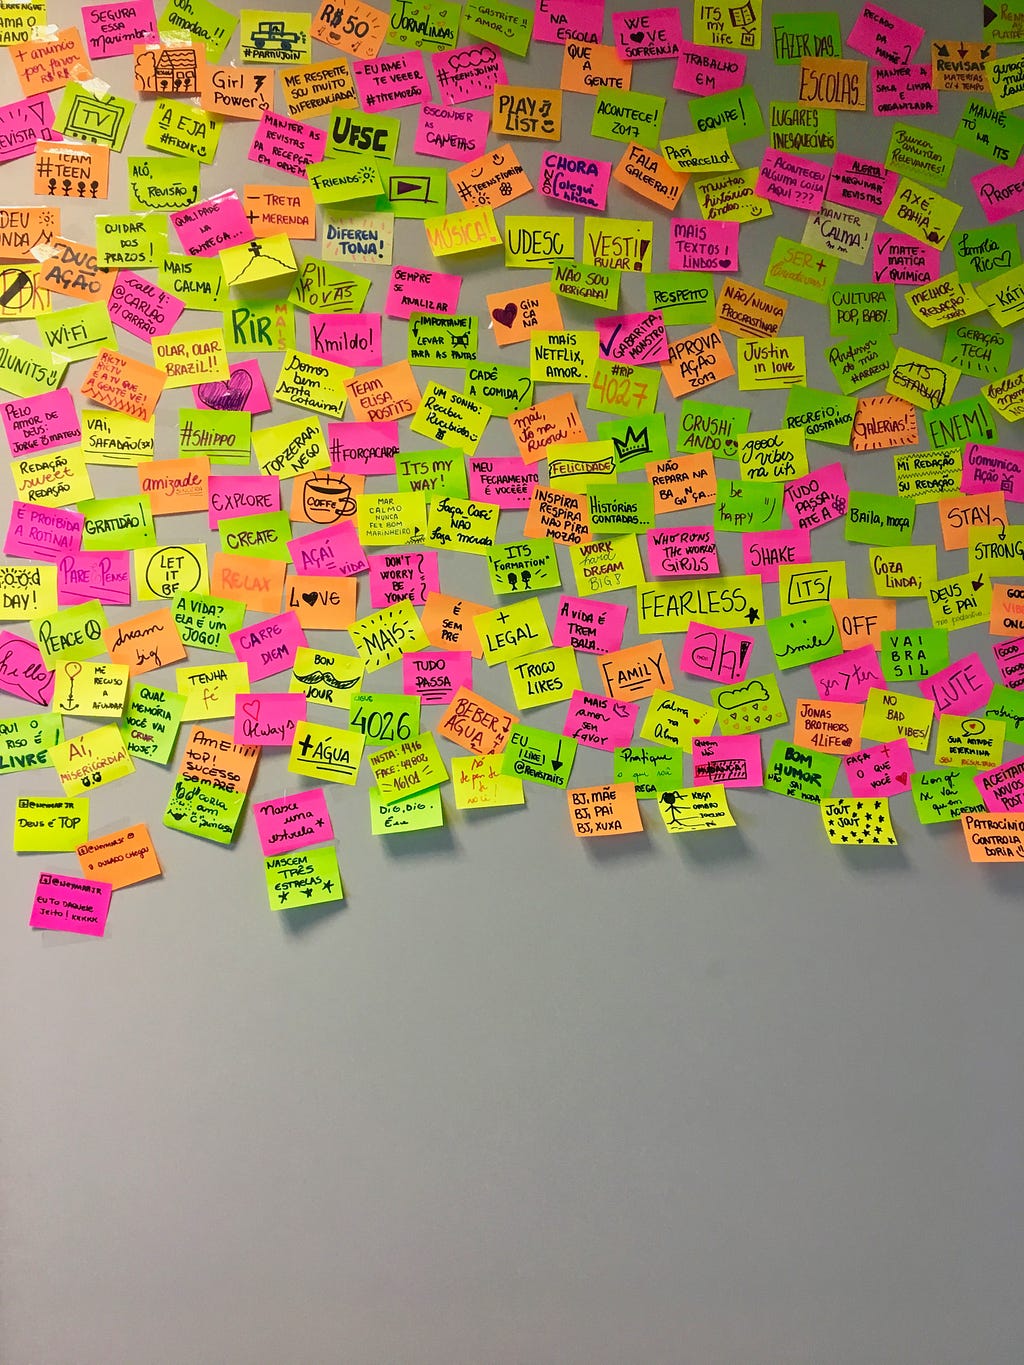 Colorful assortment of Post-it notes arranged on a gray wall.